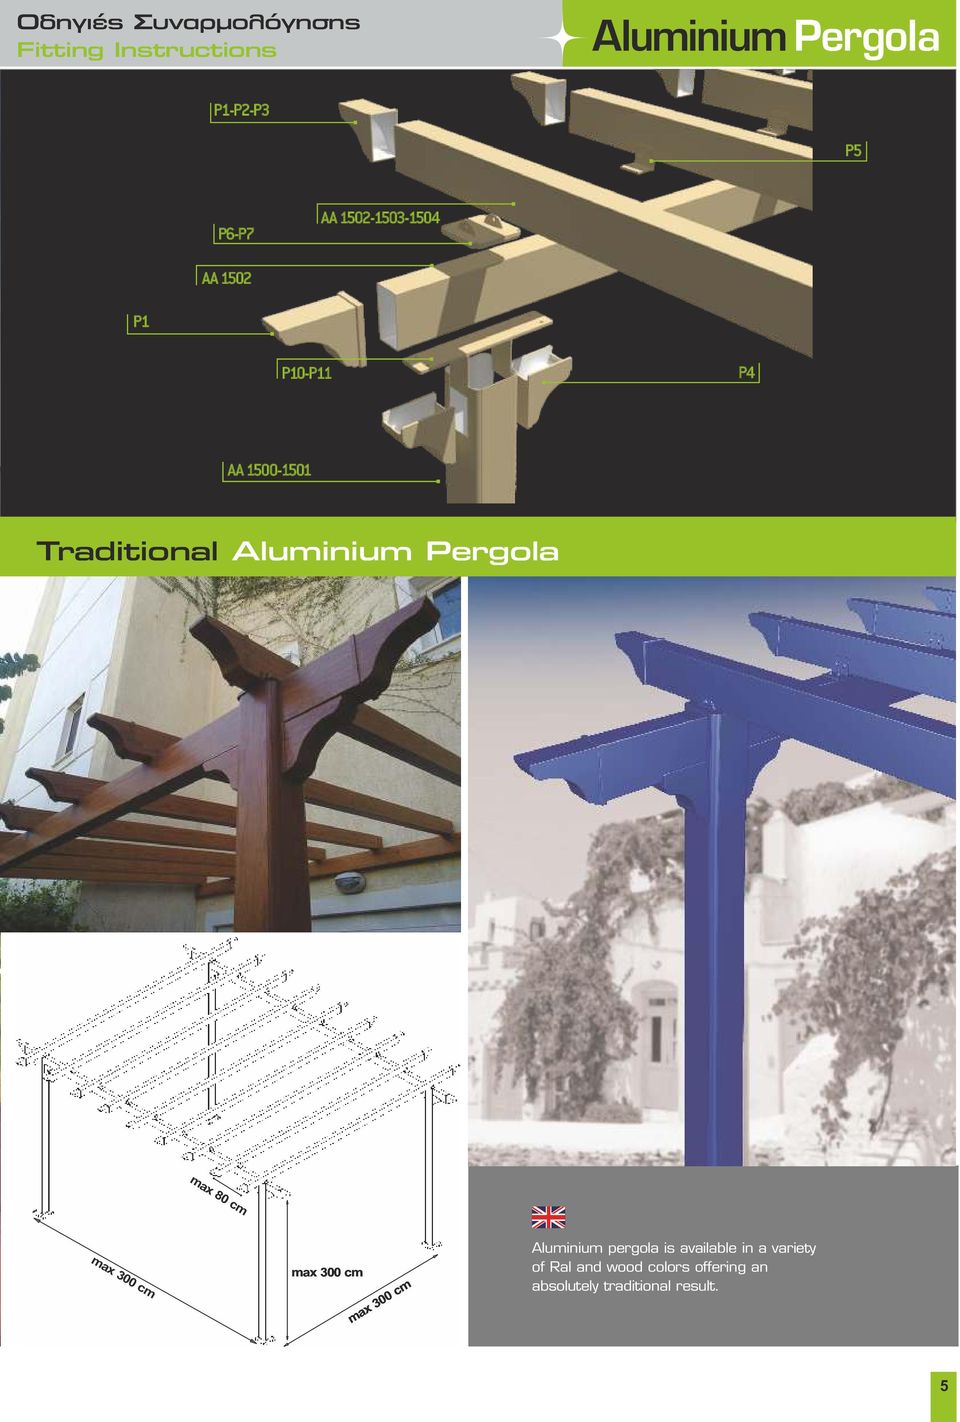 Pergola max 80 cm max 300 cm max 300 cm max 300 cm Aluminium pergola is